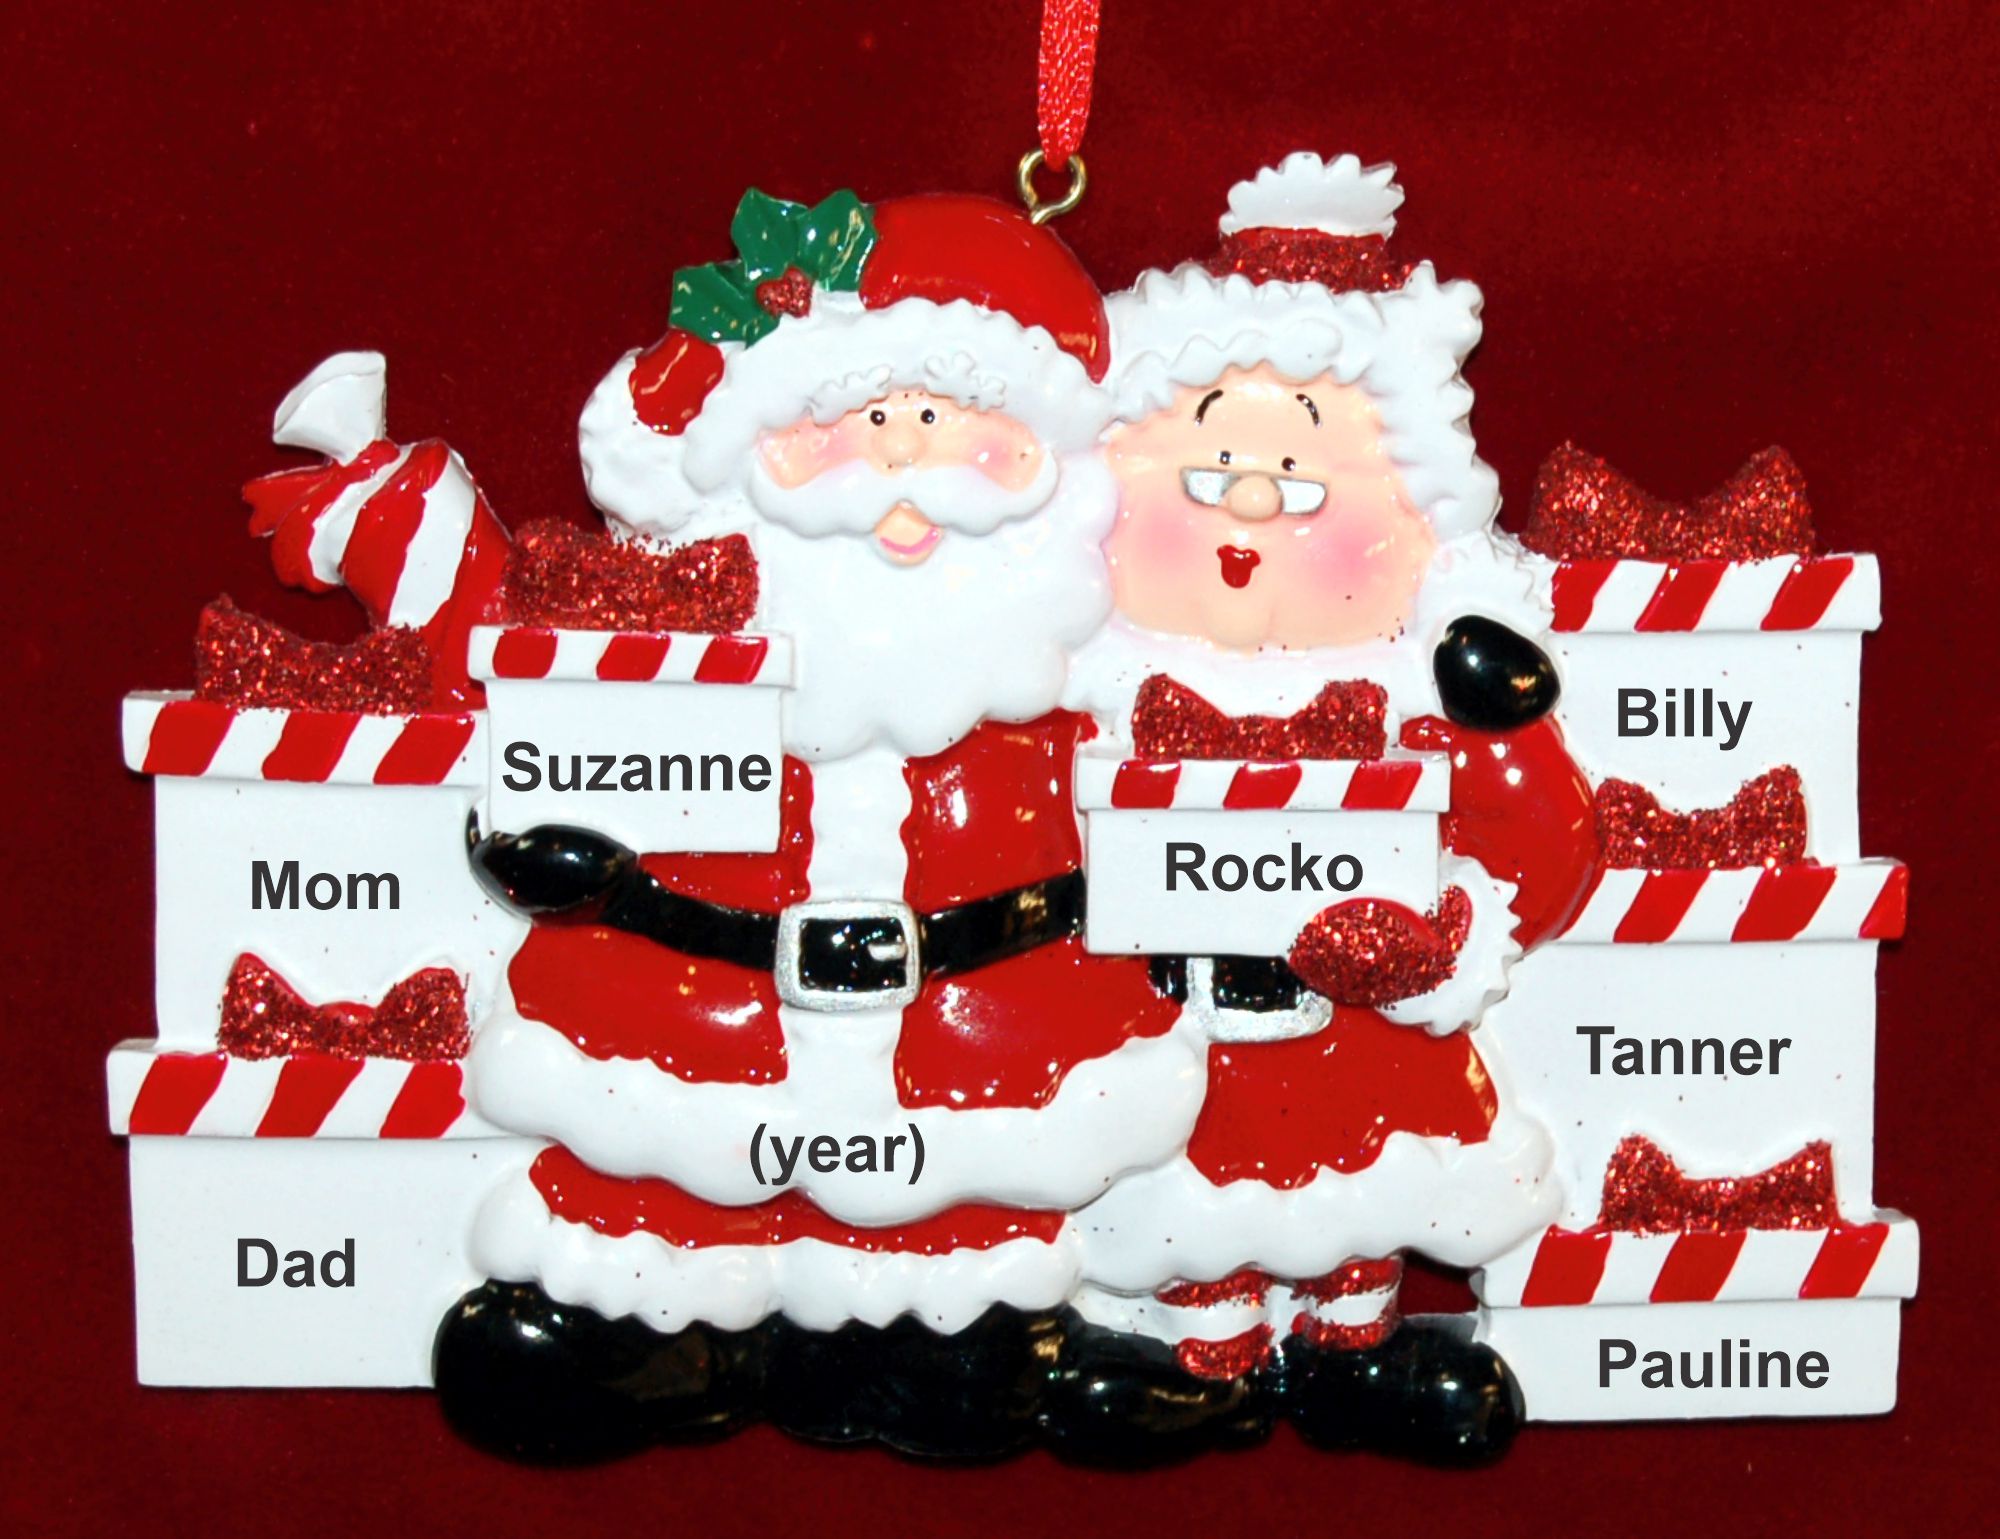 Family Christmas Ornament Xmas Presents for 7 Personalized FREE by Russell Rhodes